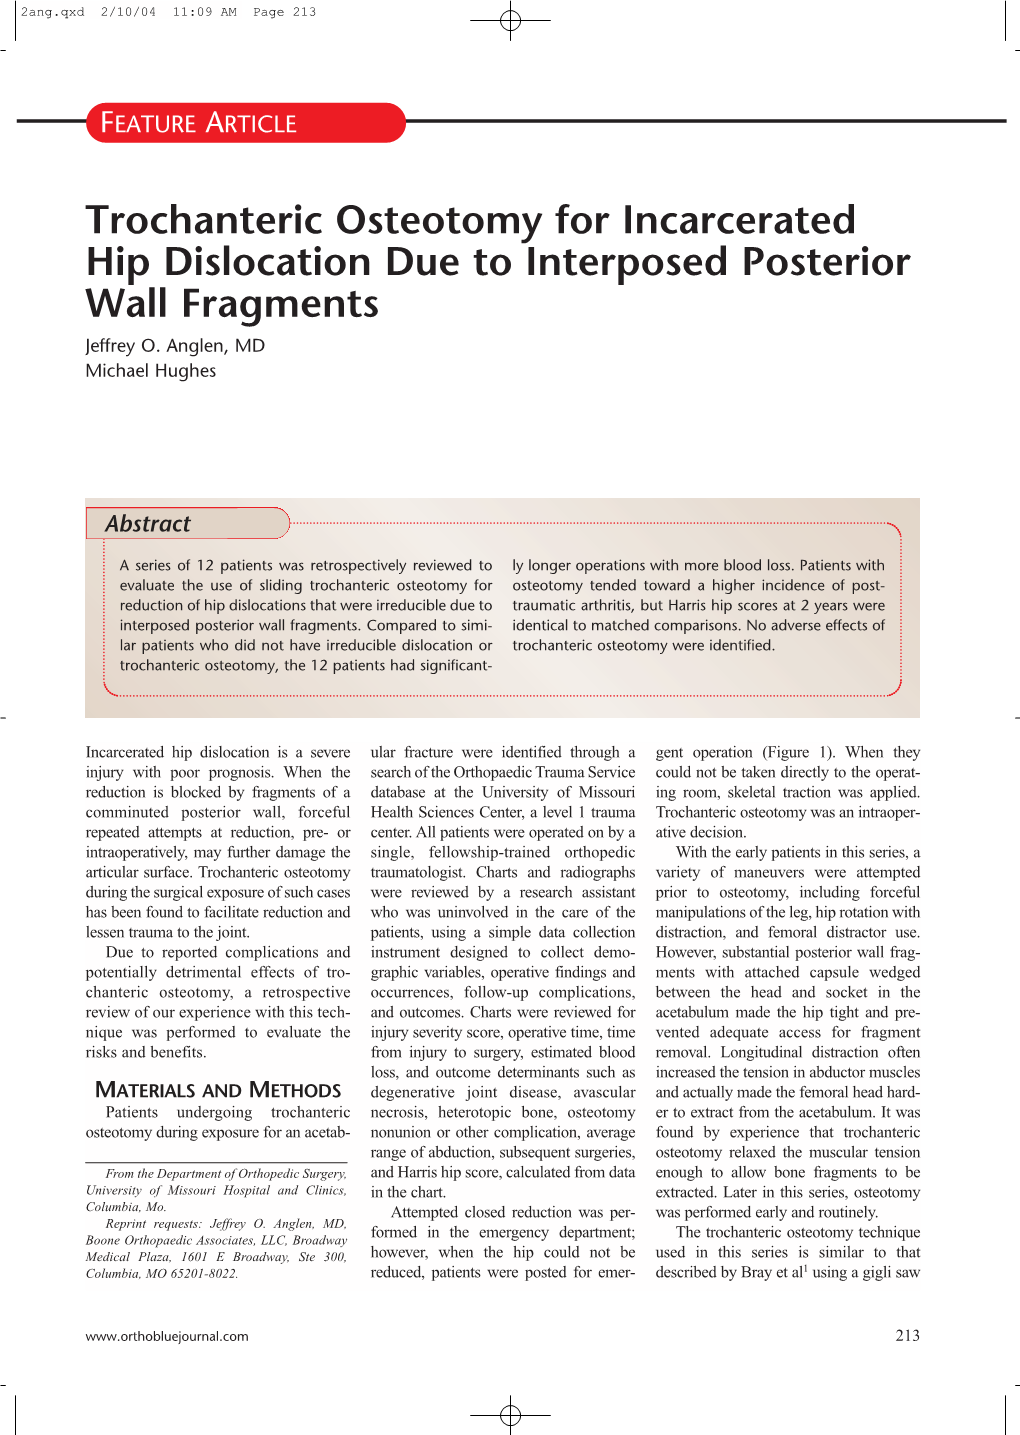 Trochanteric Osteotomy for Incarcerated Hip Dislocation Due to Interposed Posterior Wall Fragments Jeffrey O